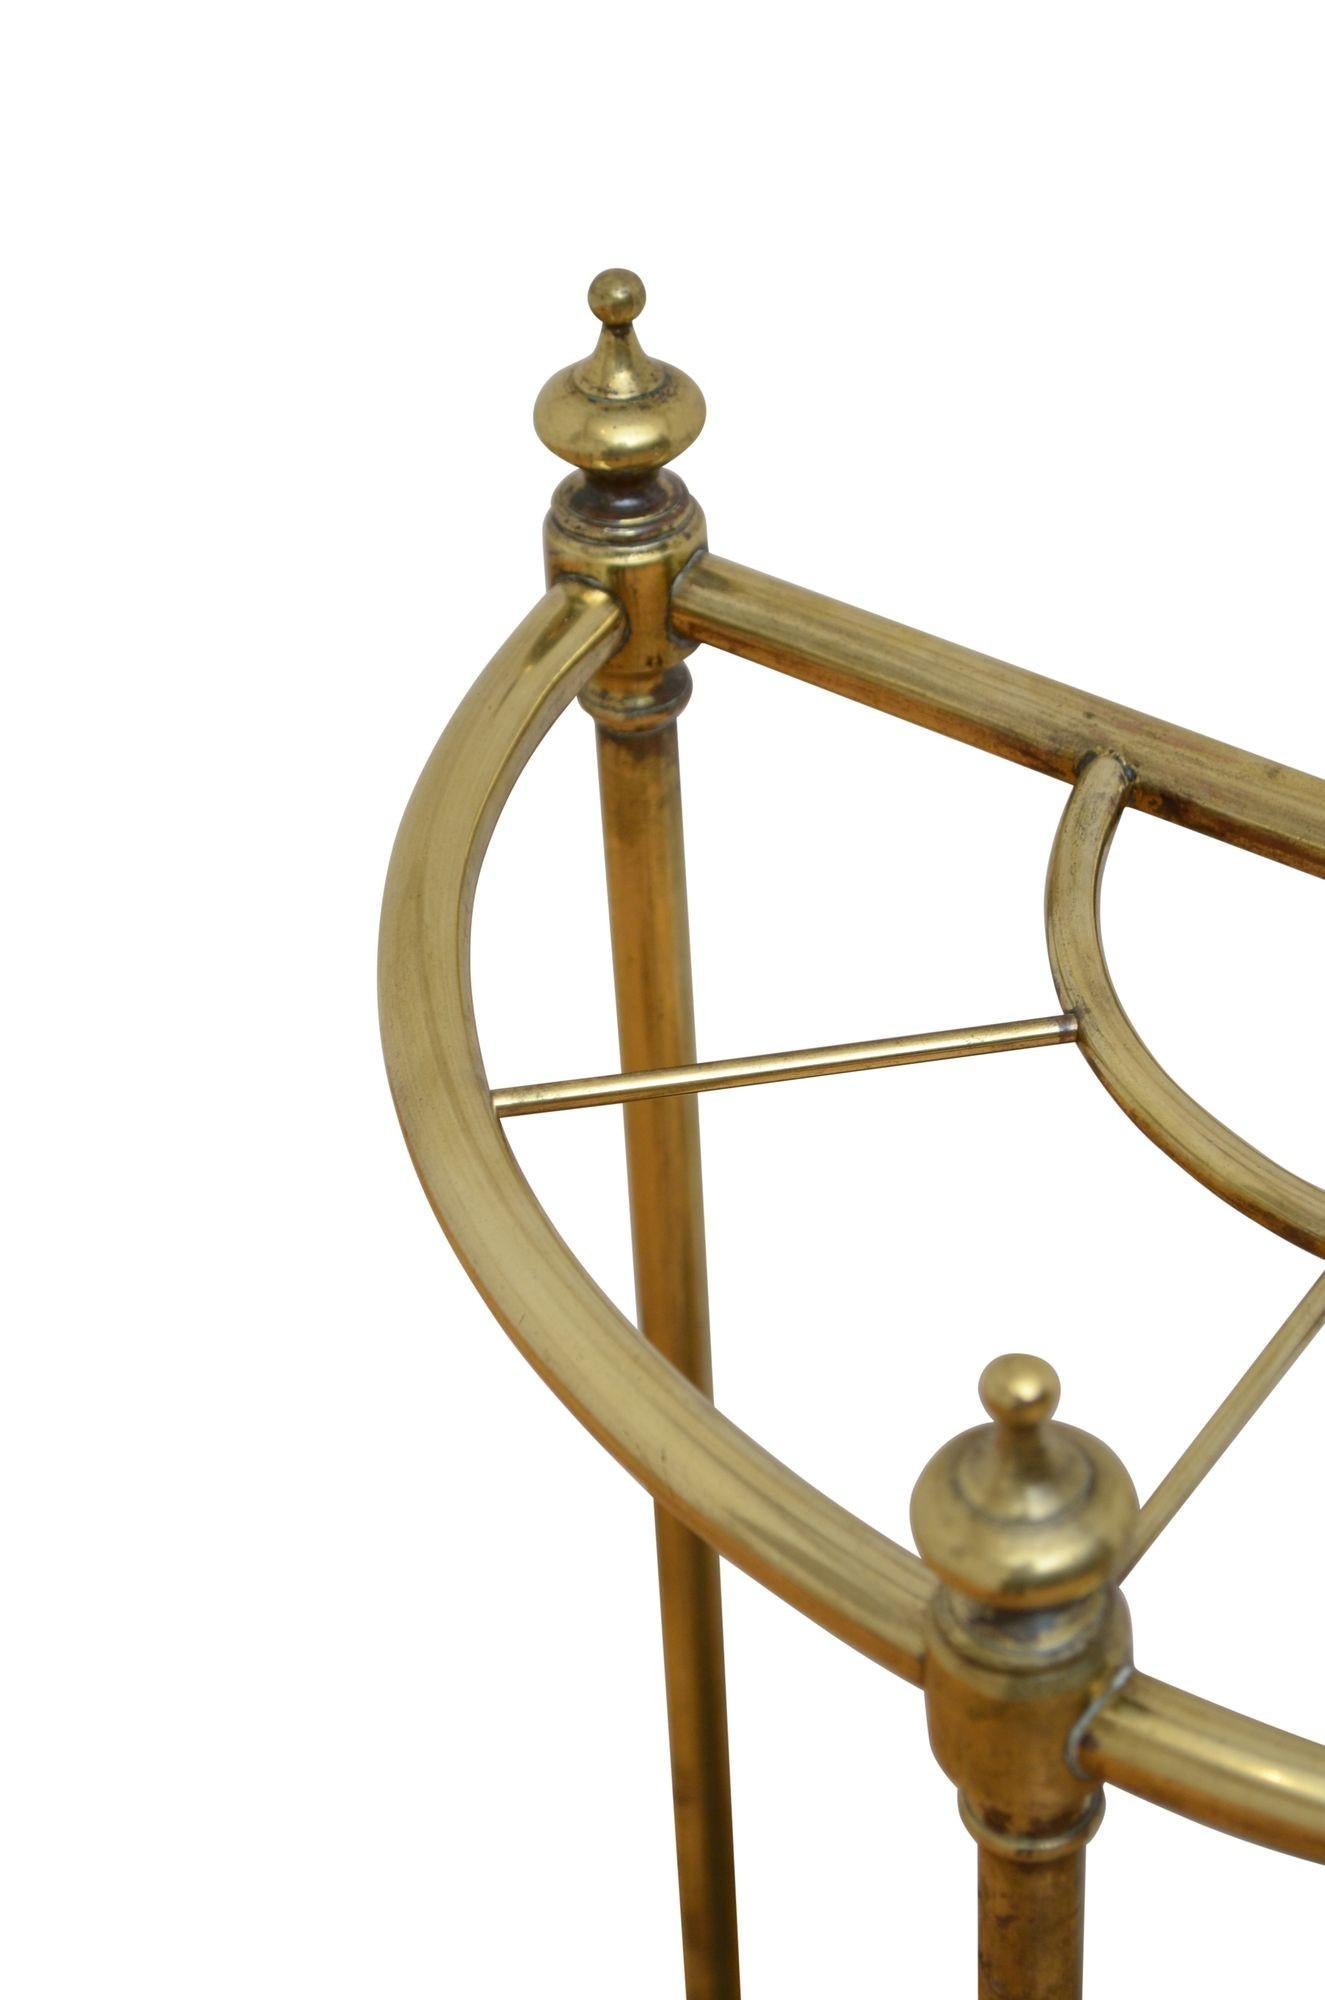 P0266 English Victorian brass umbrella stand or walking stick stand with five divisions, three decorative finials and cast iron drip tray. This antique hall stand has been sympathetically cleaned, it retains its antique character and is ready to